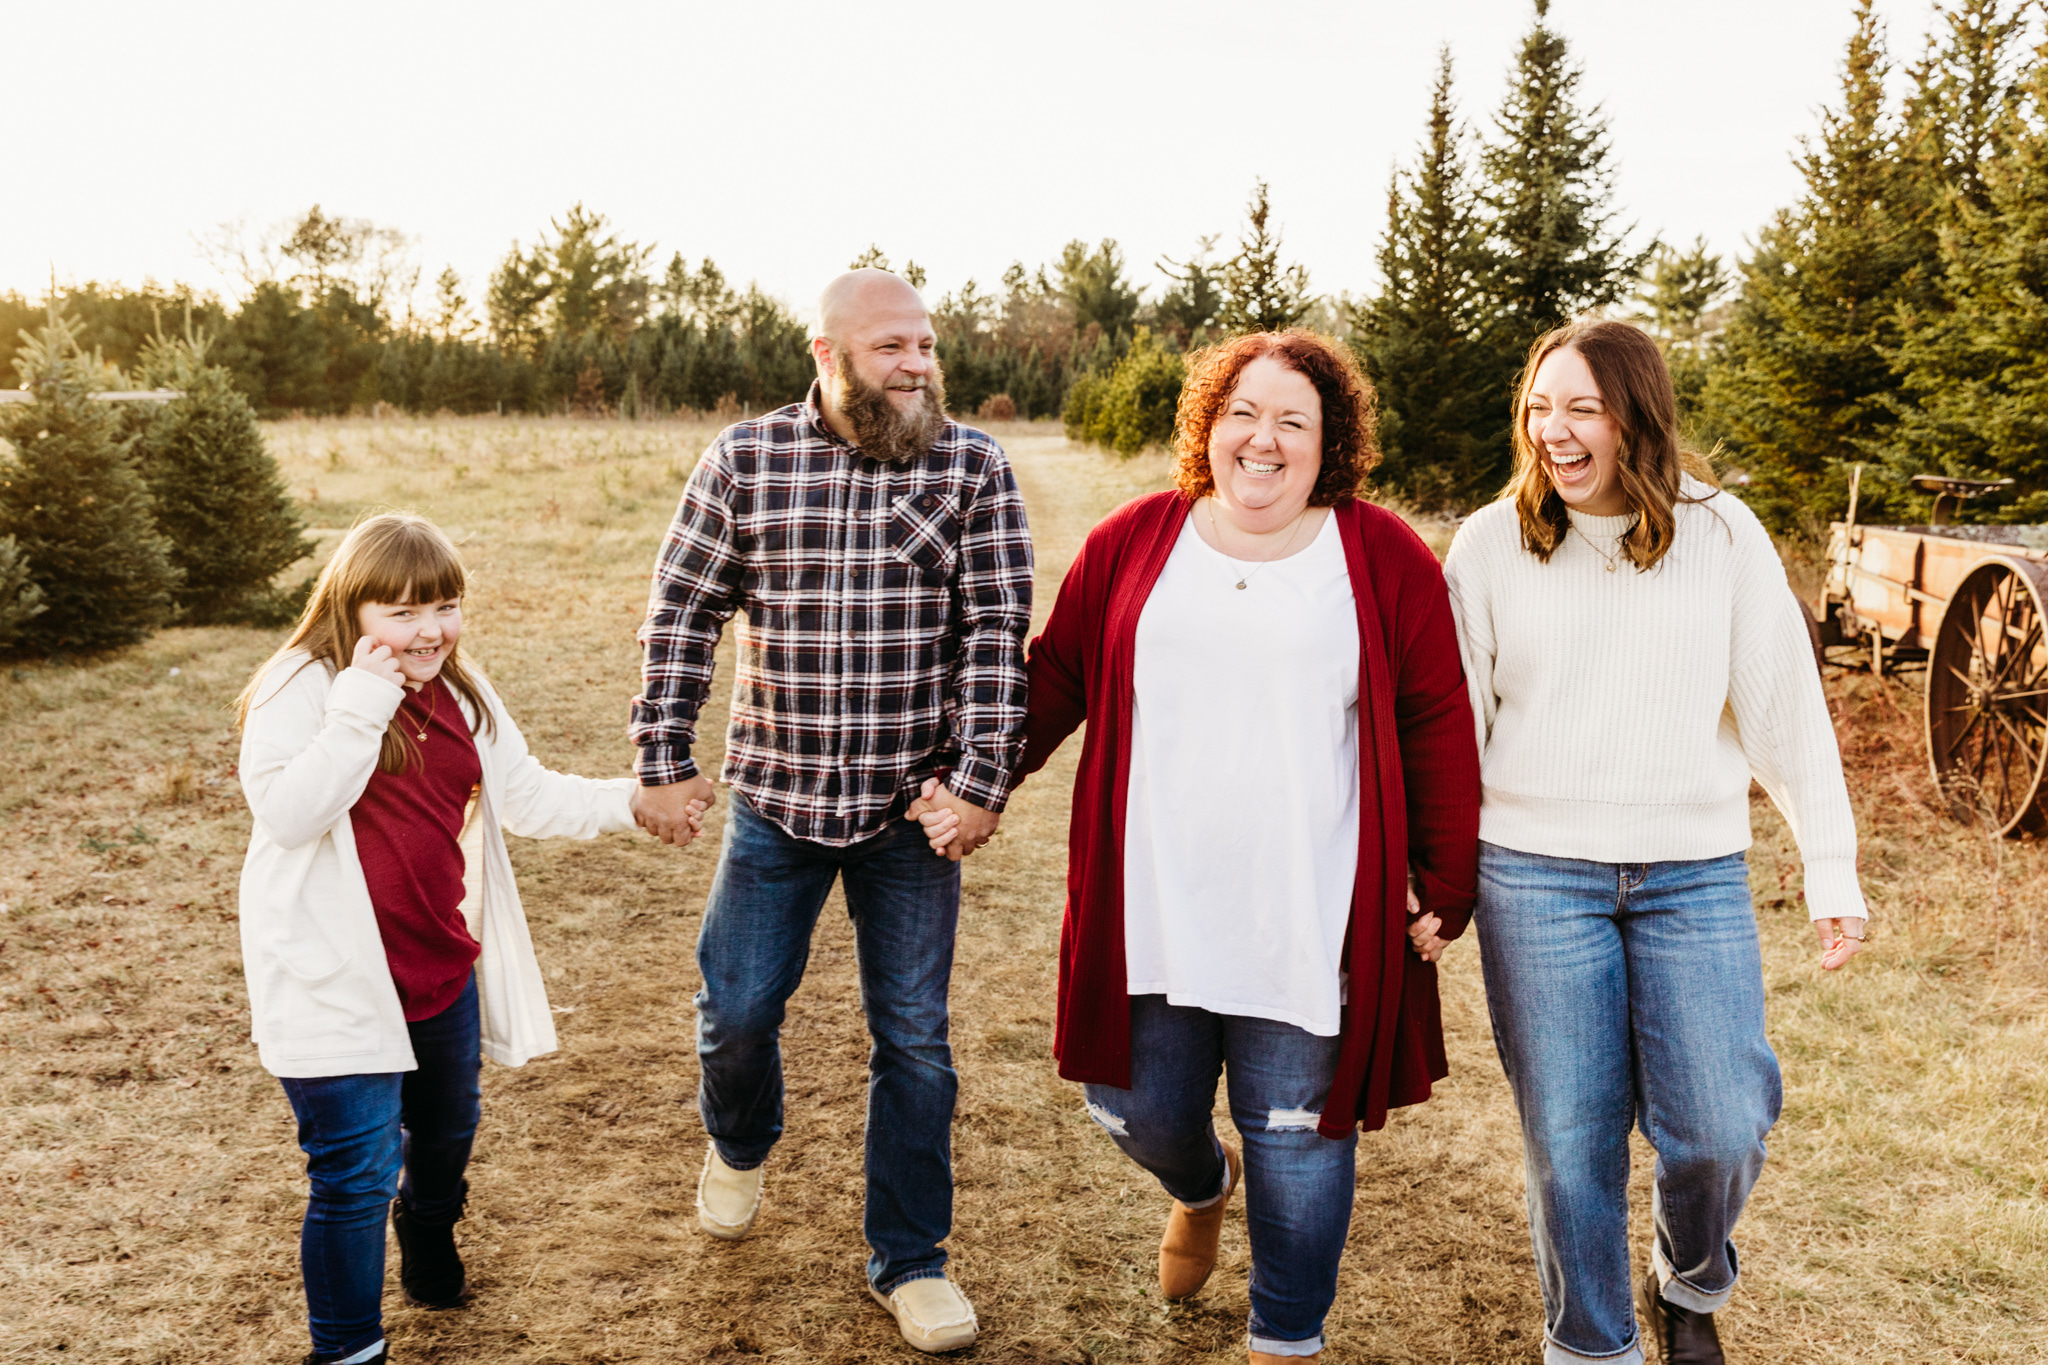 family of 4 laughing and walking through a field